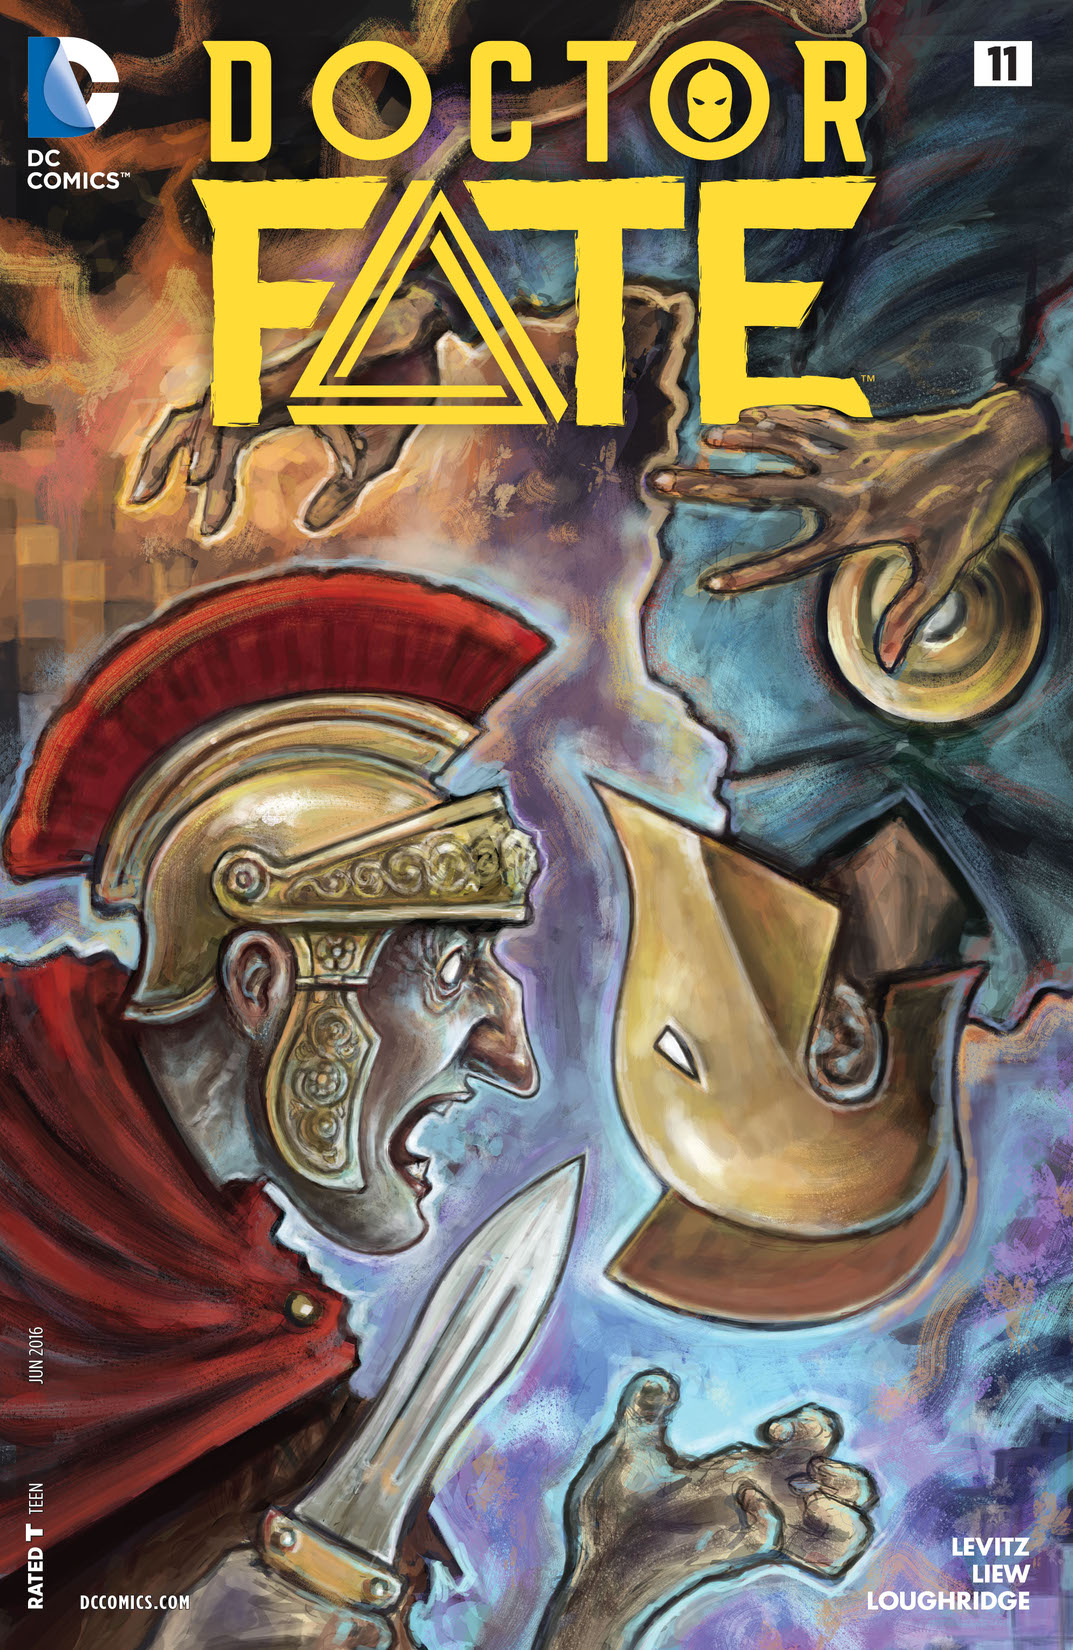 Doctor Fate (2015-) #11 preview images